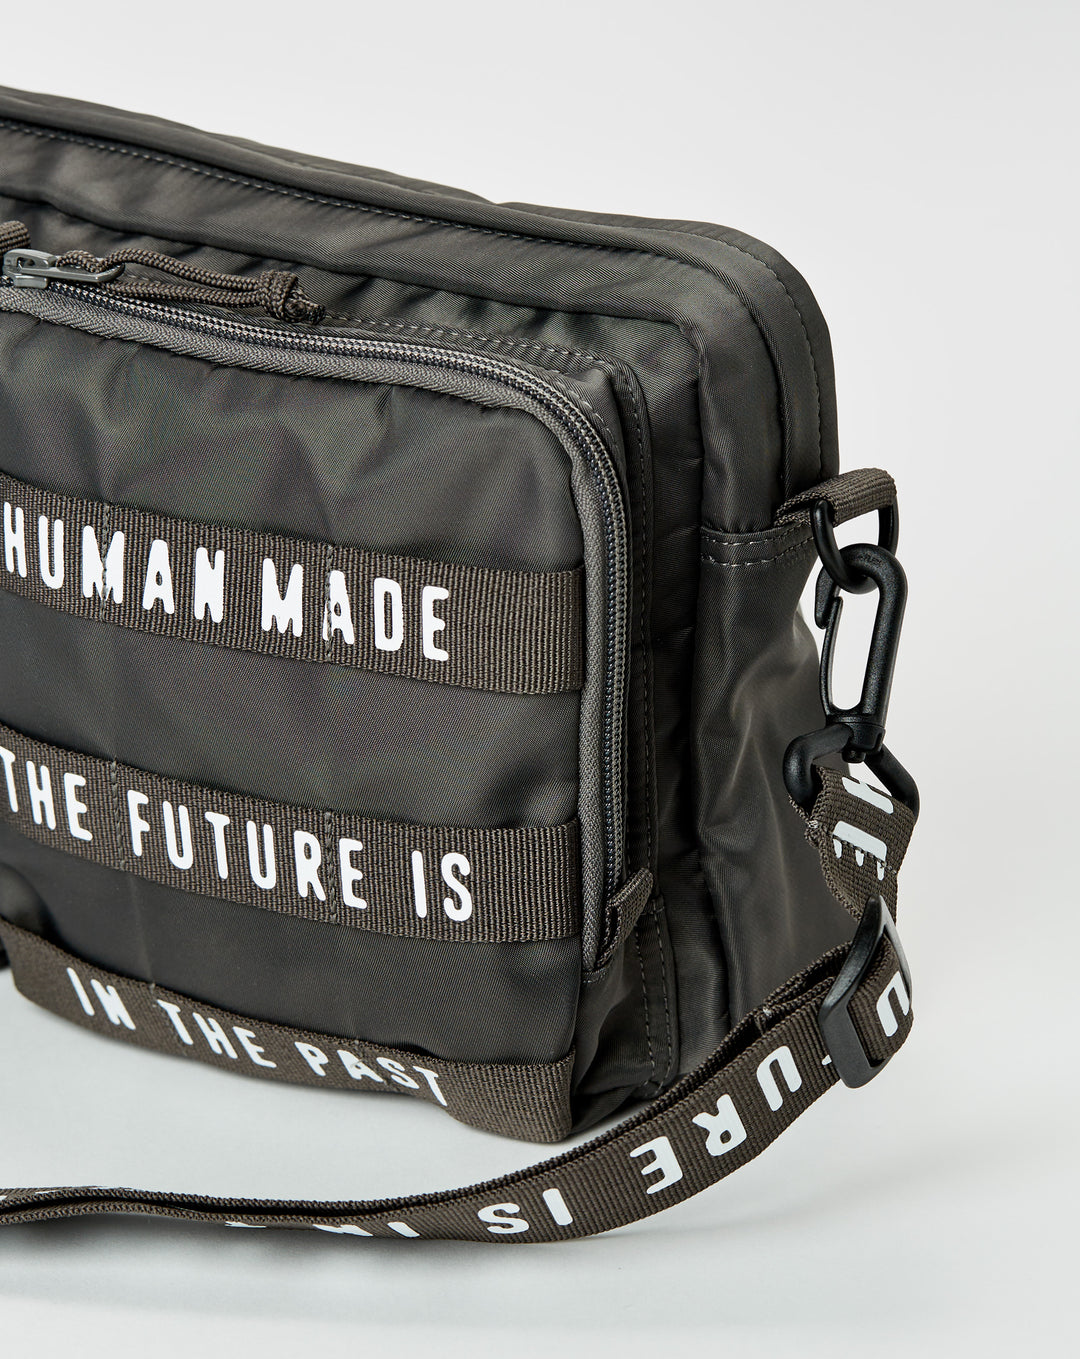 Human Made Military Pouch Large  - XHIBITION